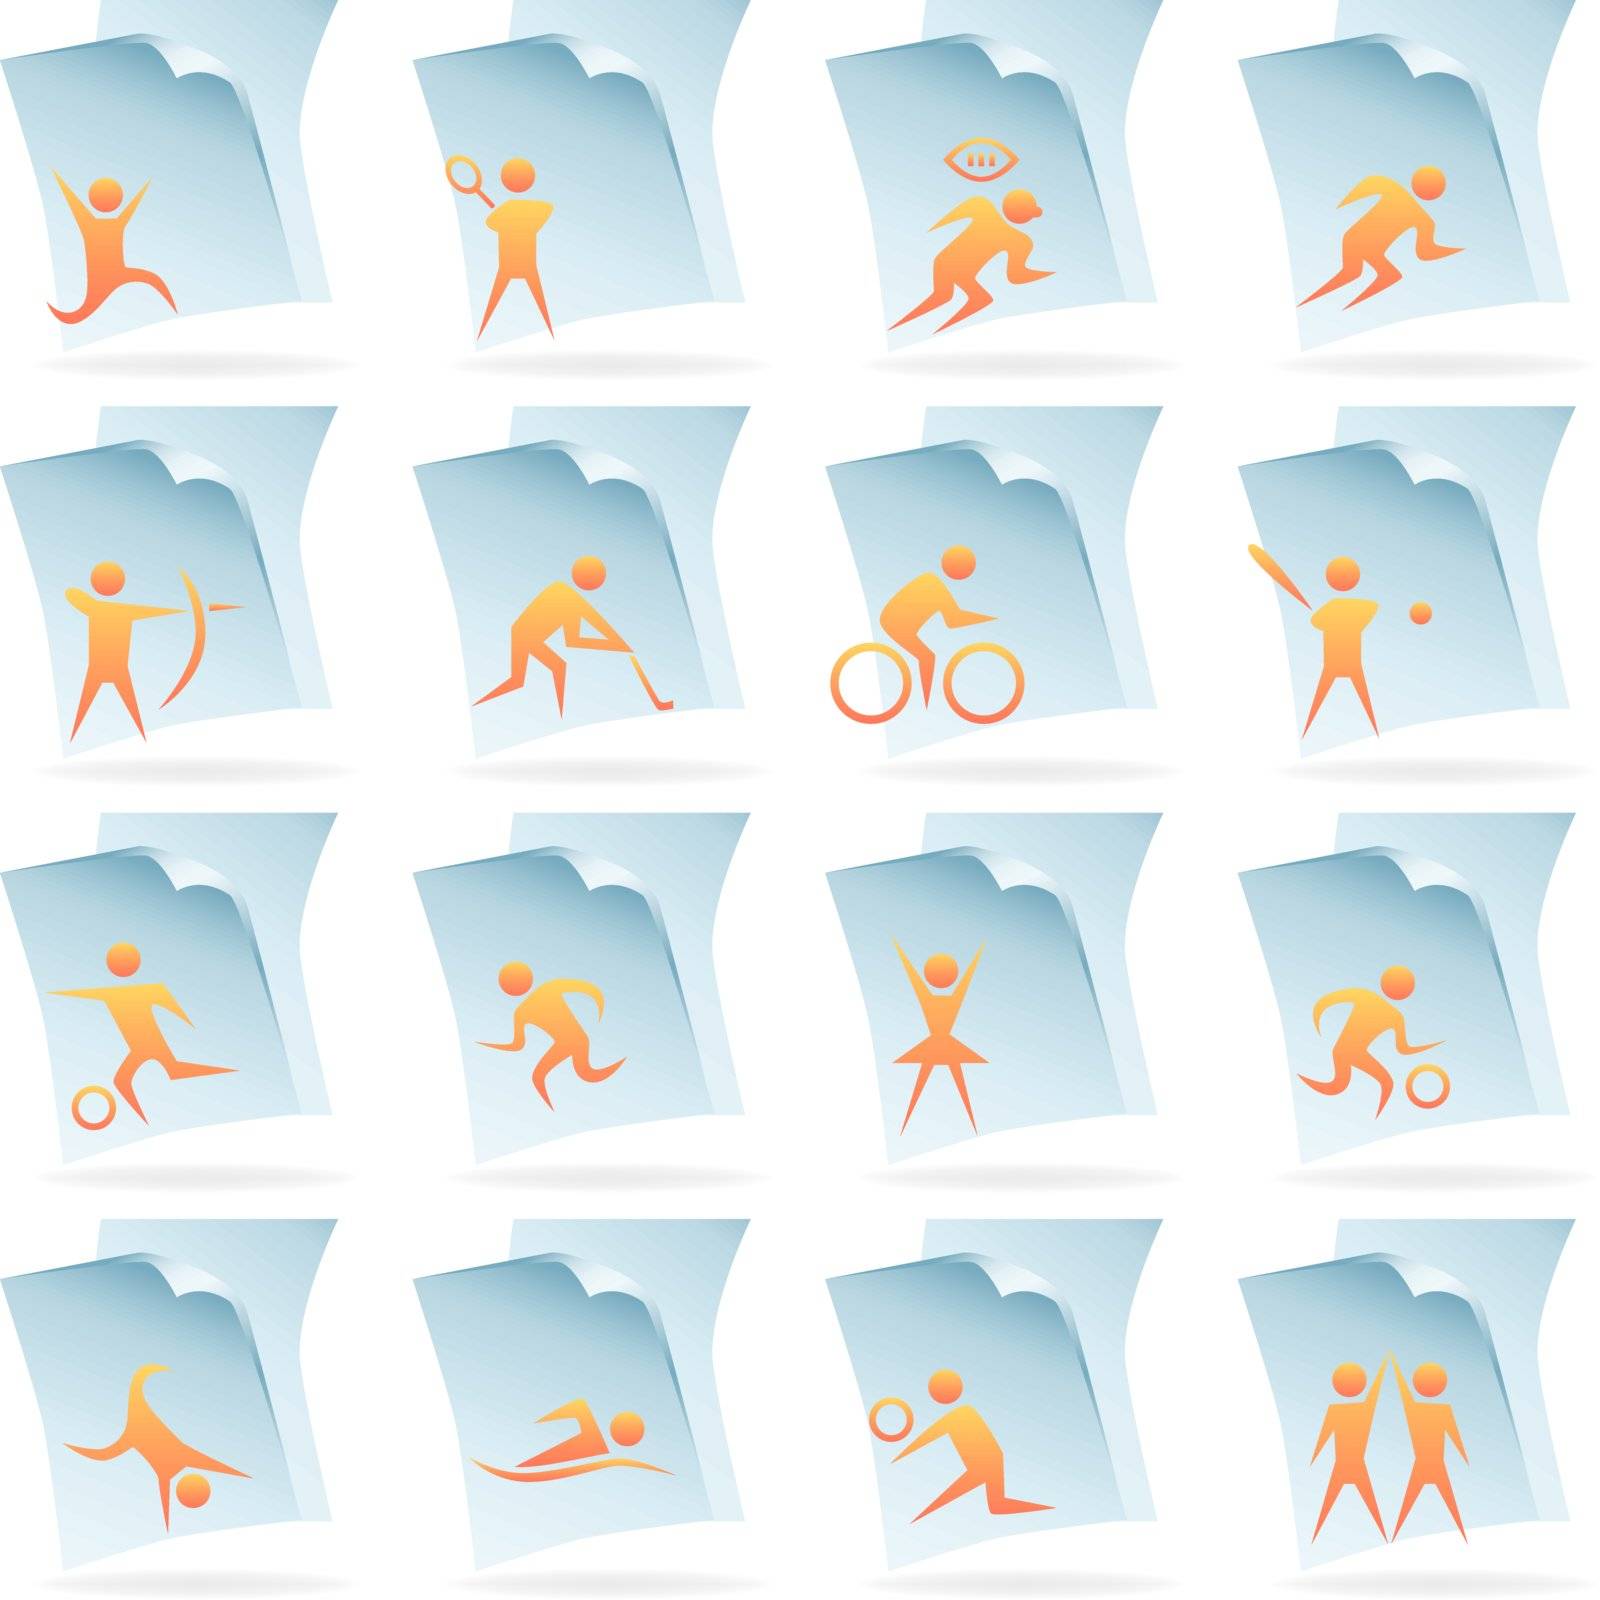 Athlete Icons by cteconsulting